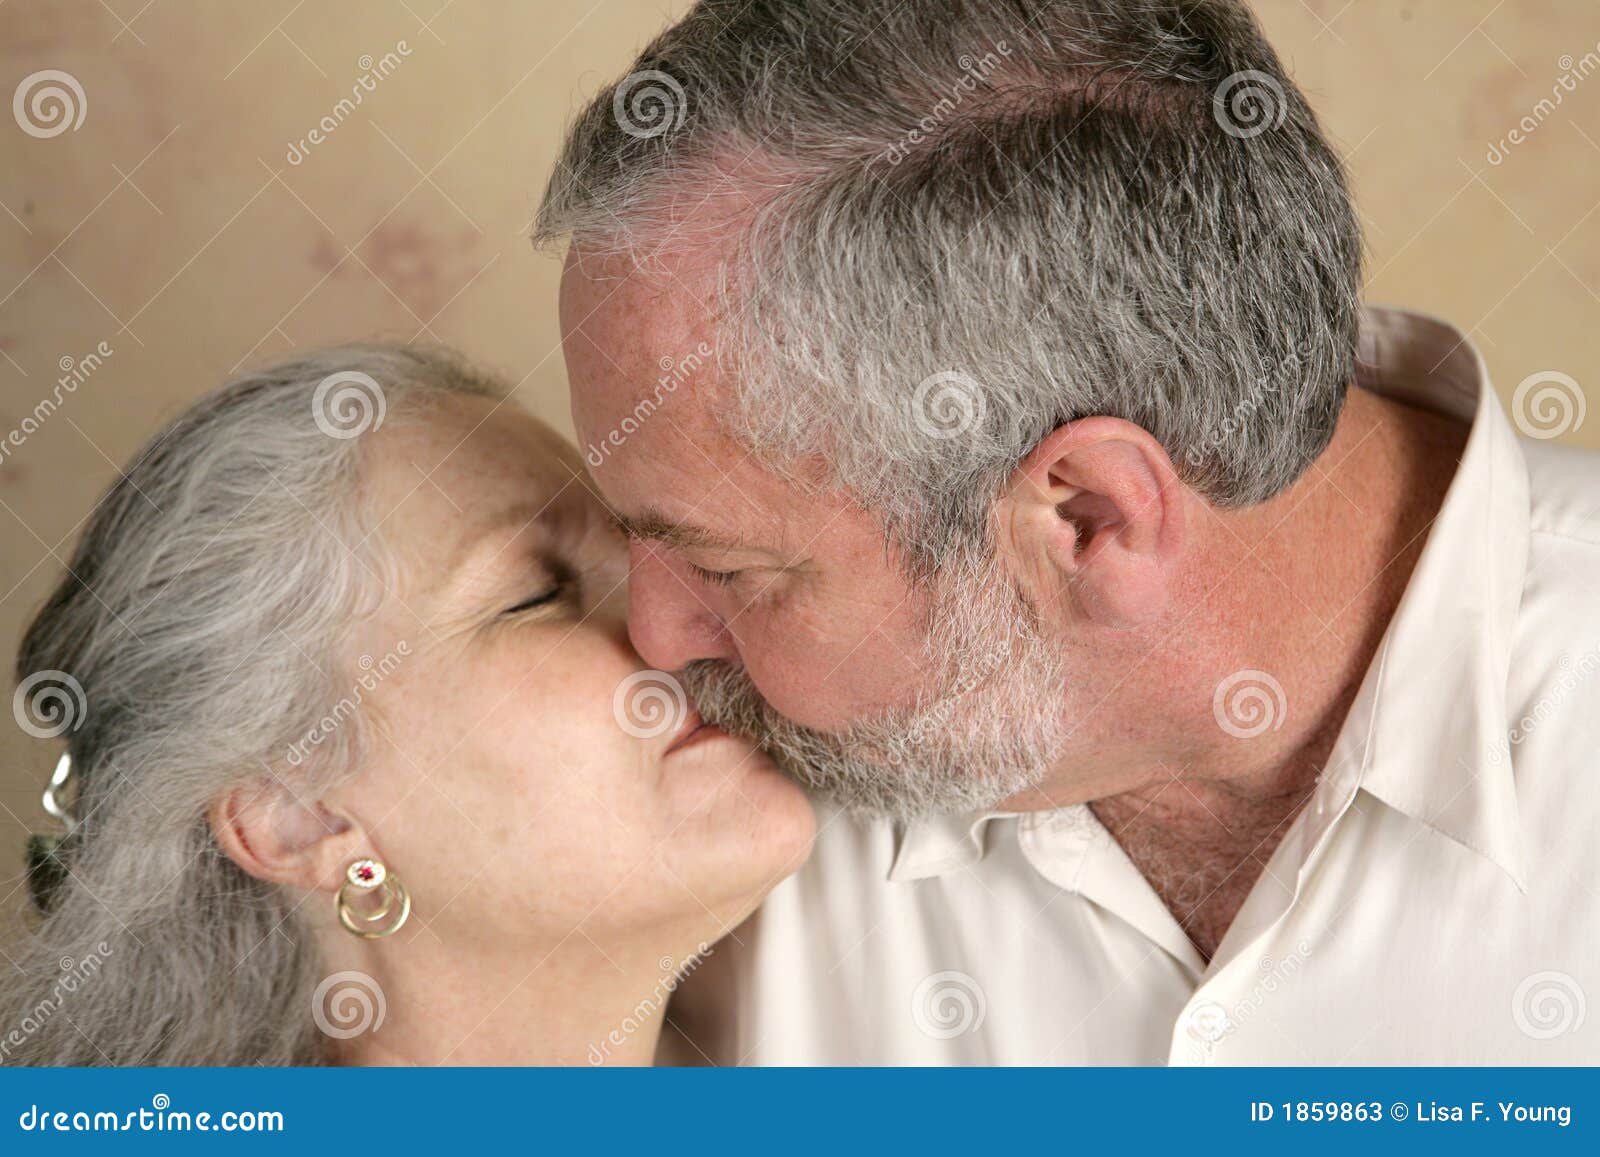 Passionate Kiss Stock Image Image Of Passion Marriage